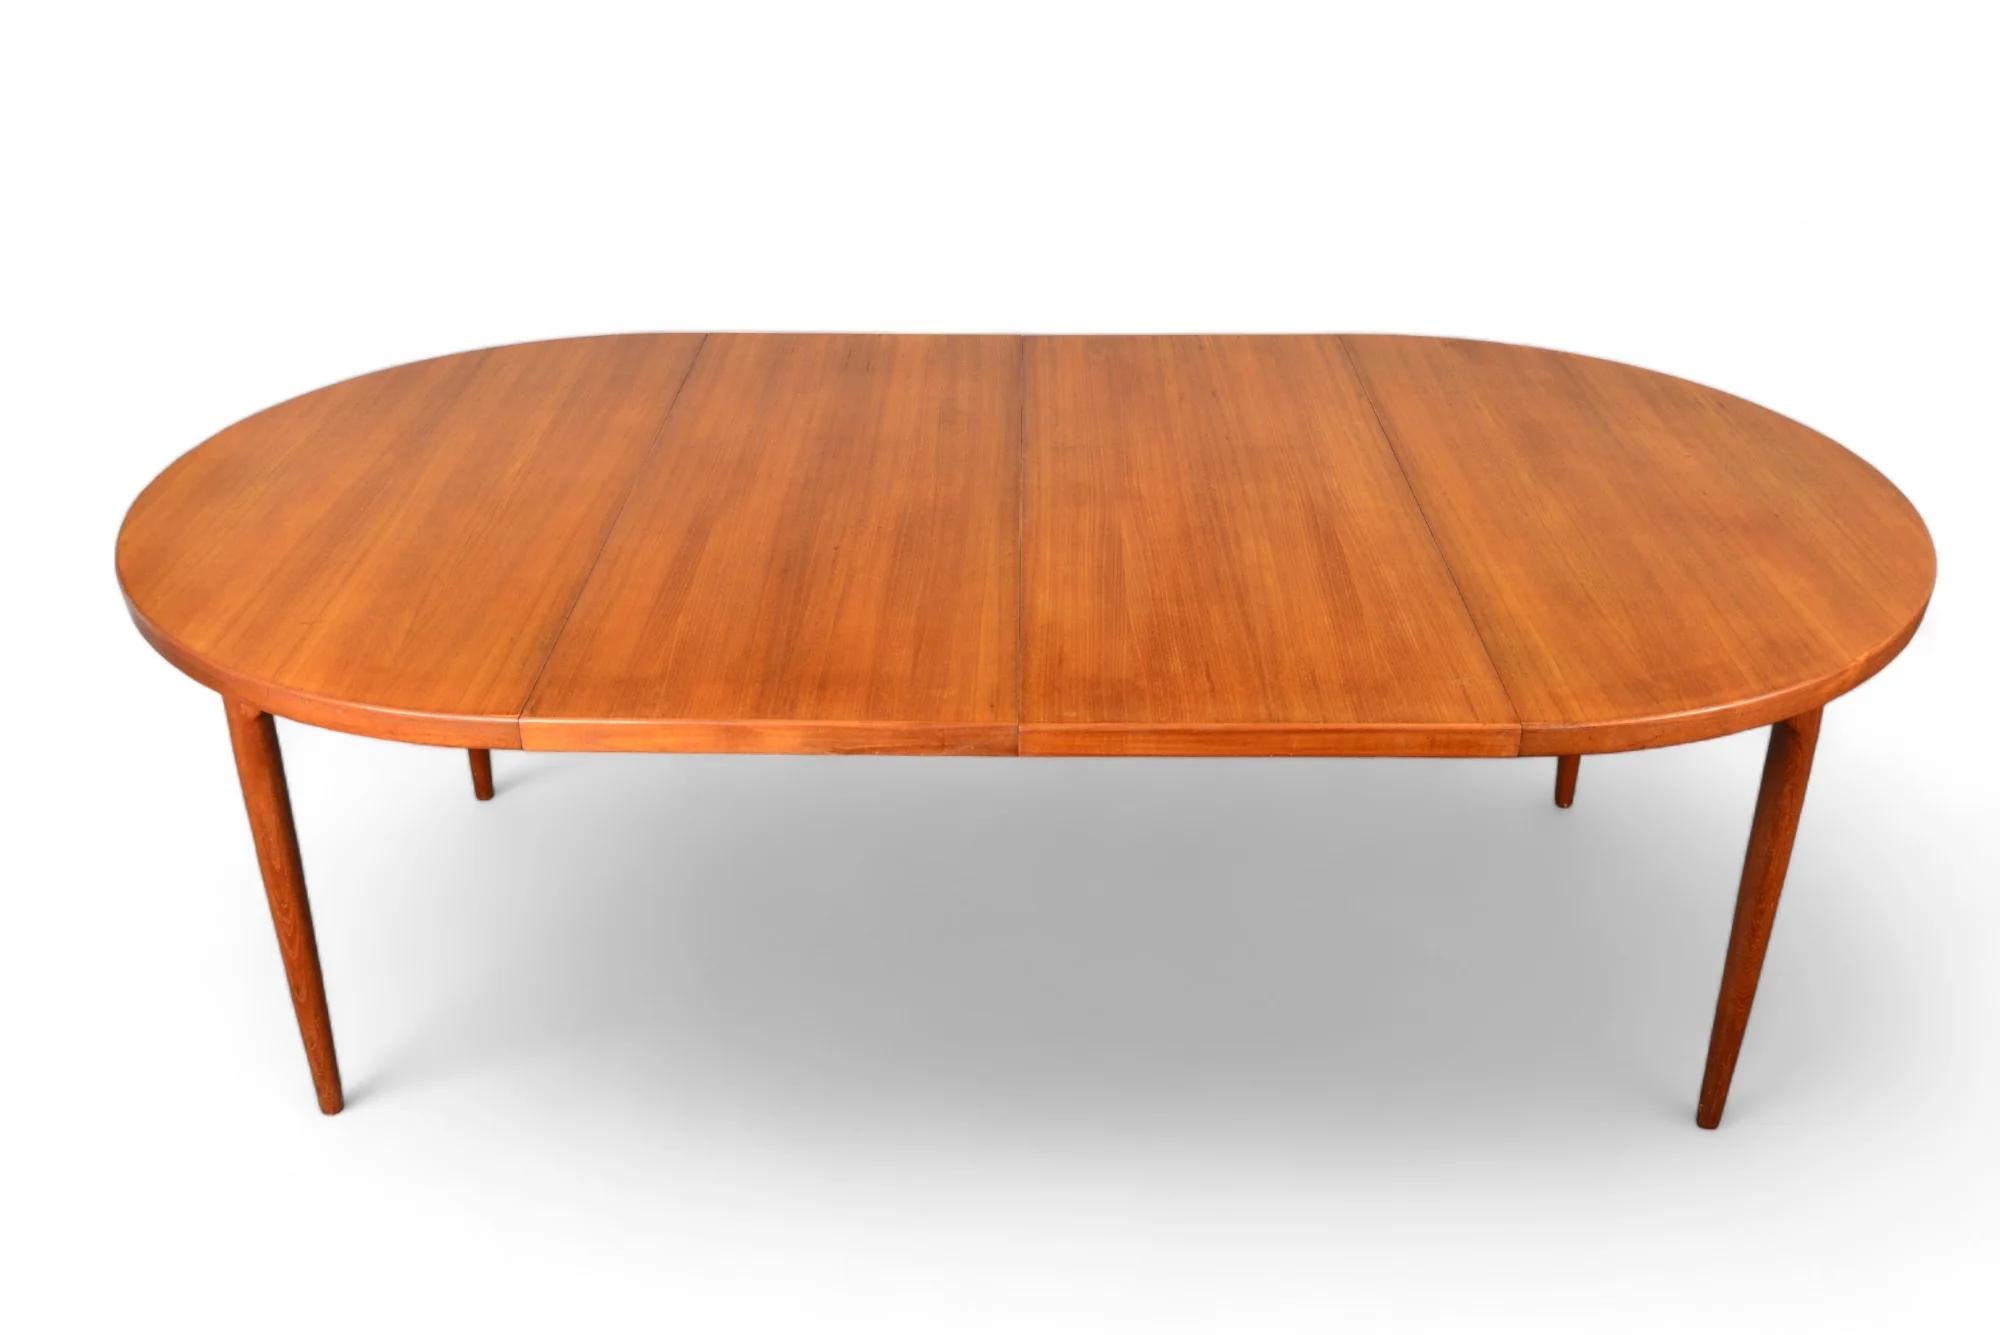 Round Danish 2 Leaf Teak Dining Table By Cj Rosengaarden + Coffee Table For Sale 3